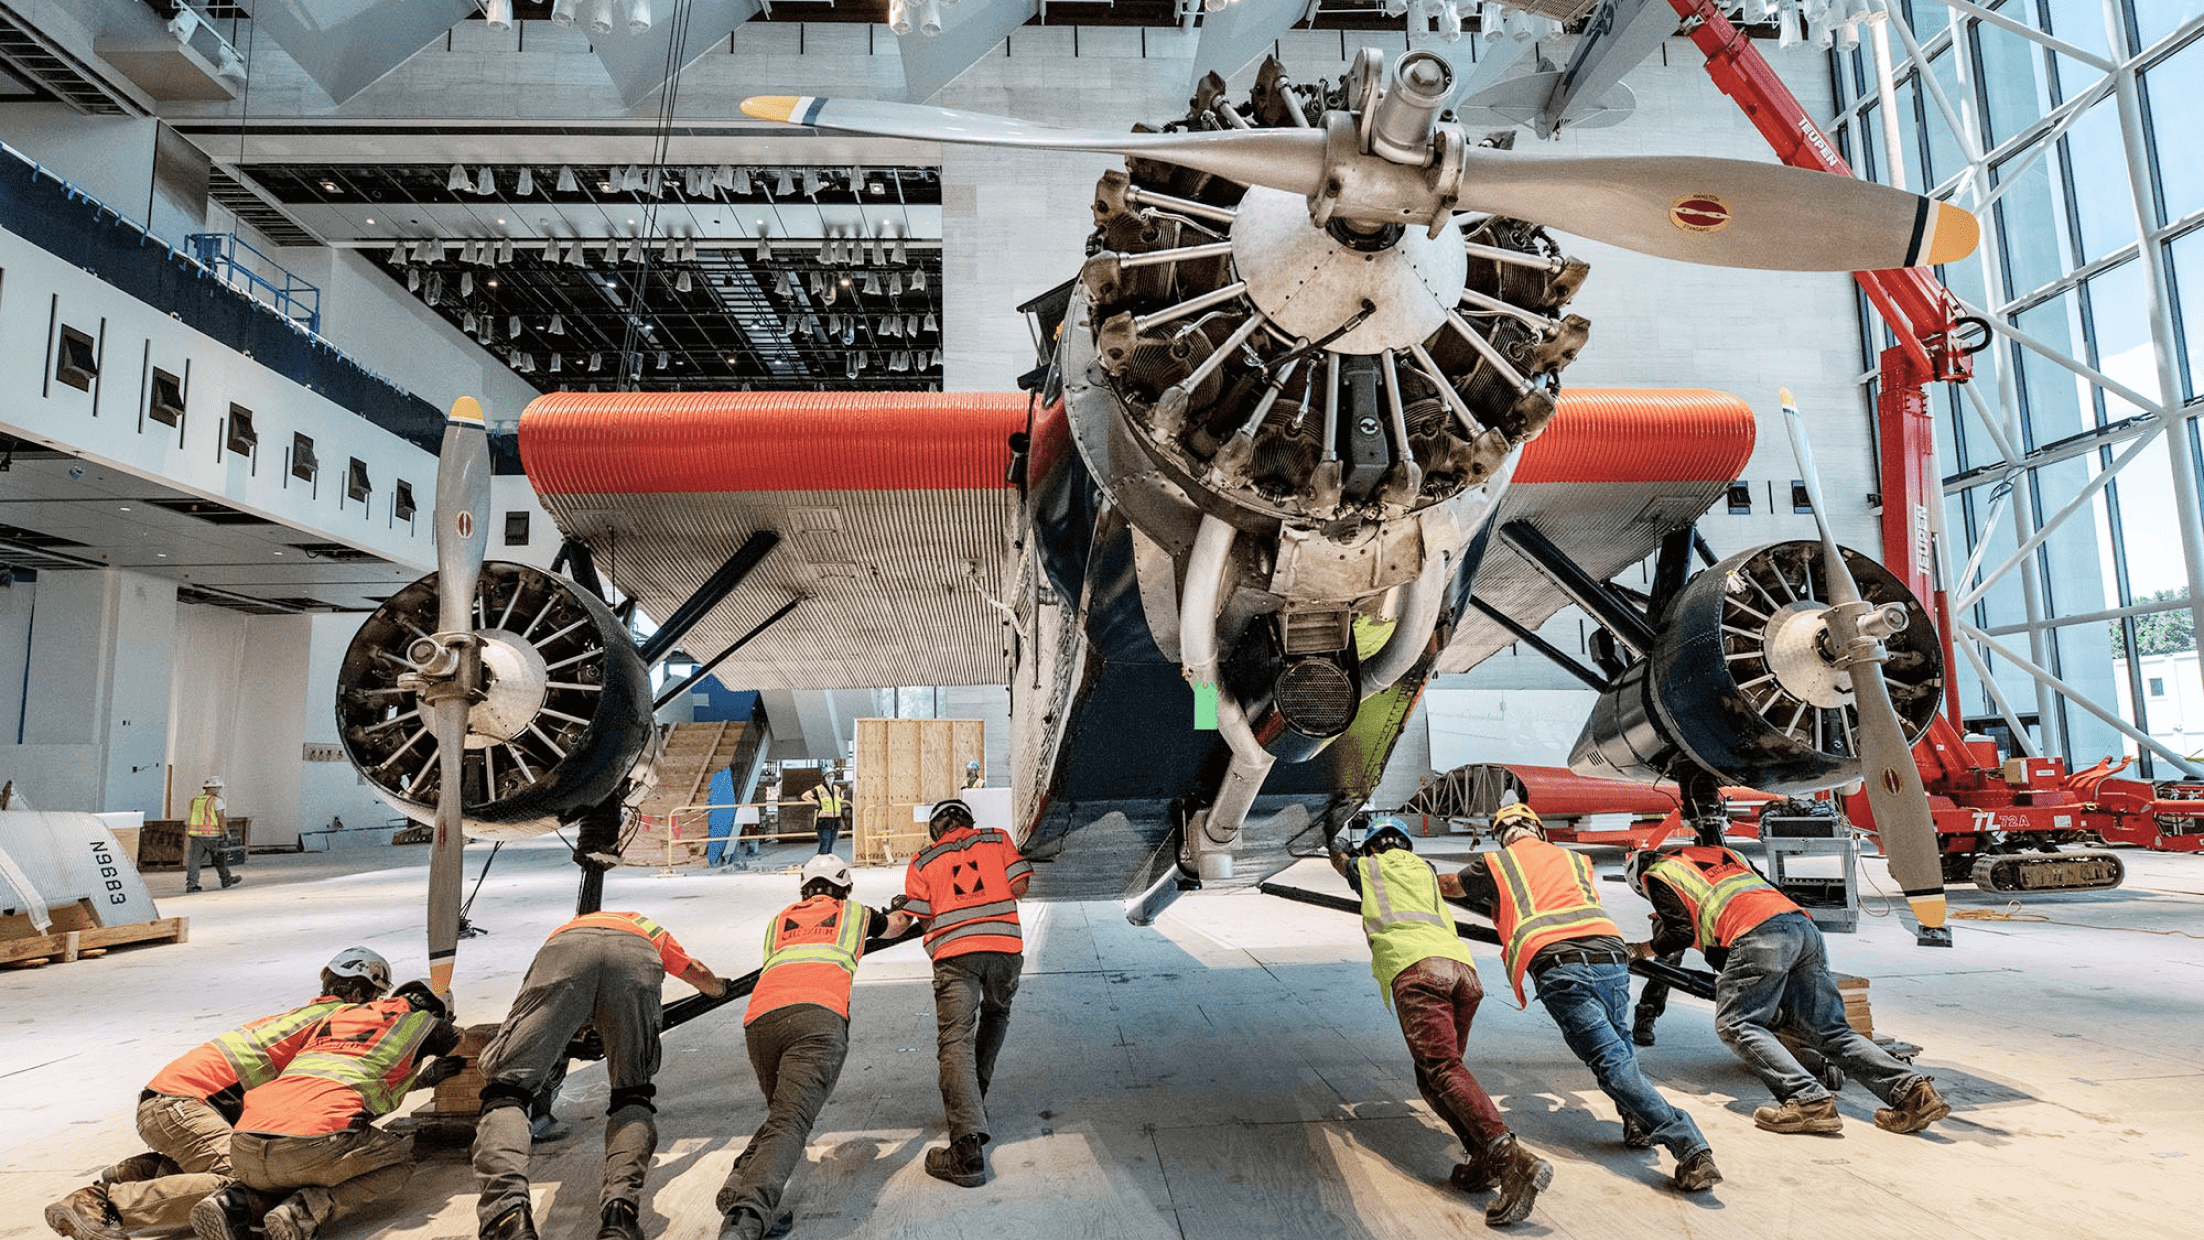 Crozier team members navigate the "Tin Goose," a 1928 Ford 5-AT Tri-Motor into place in the "America by Air" gallery. Photo courtesy of Jim Preston / The Washingtonian